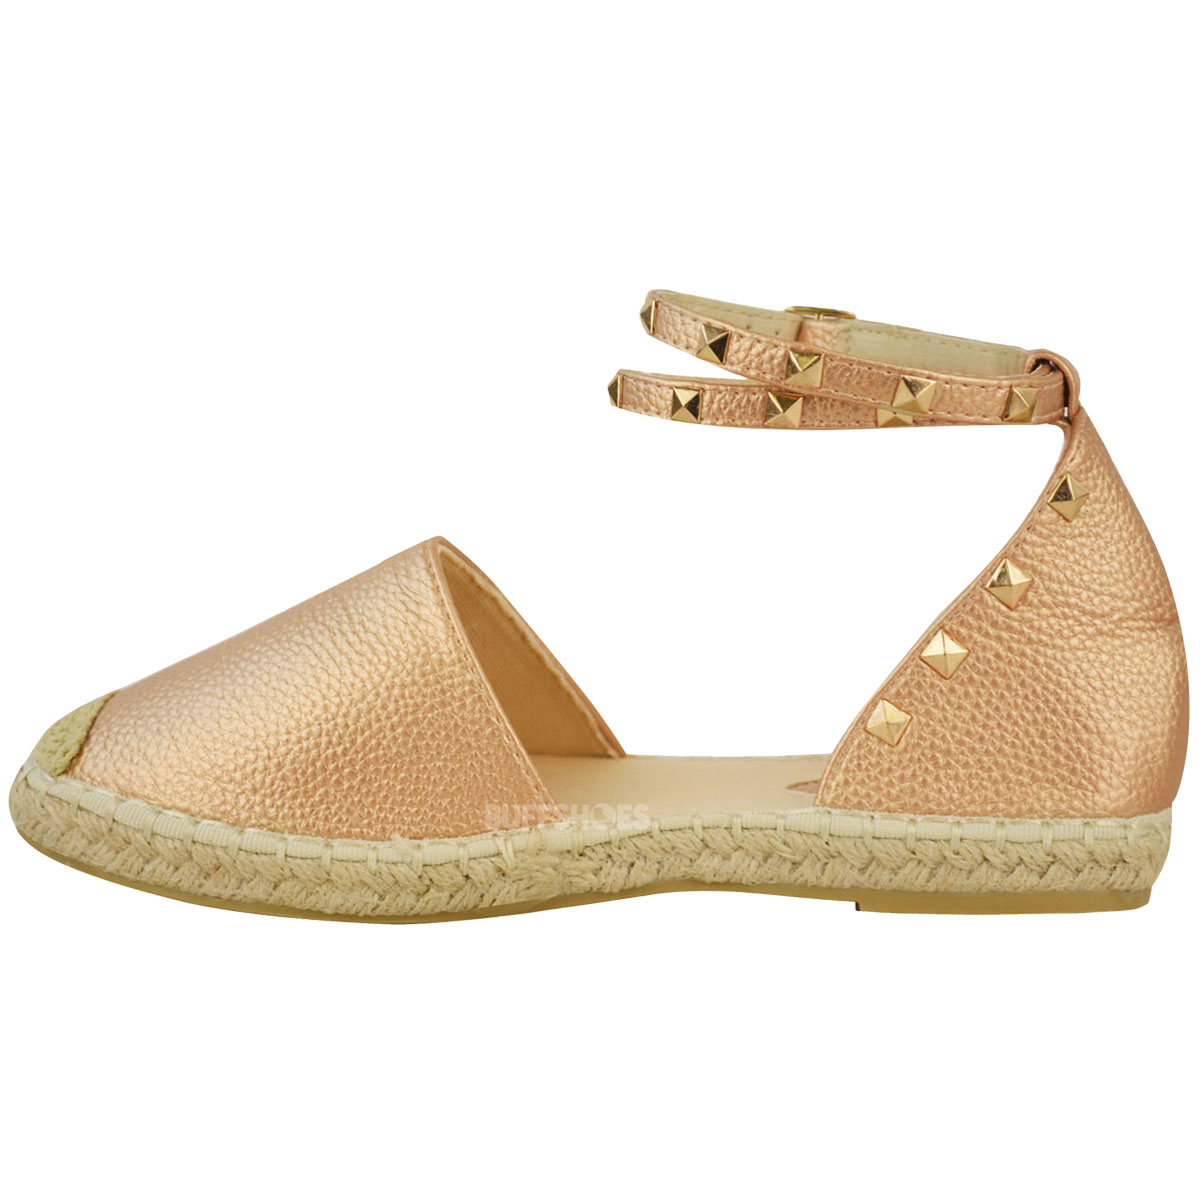 Womens Ladies Espadrilles Ankle Strappy Flat Summer Sandals Studded ...